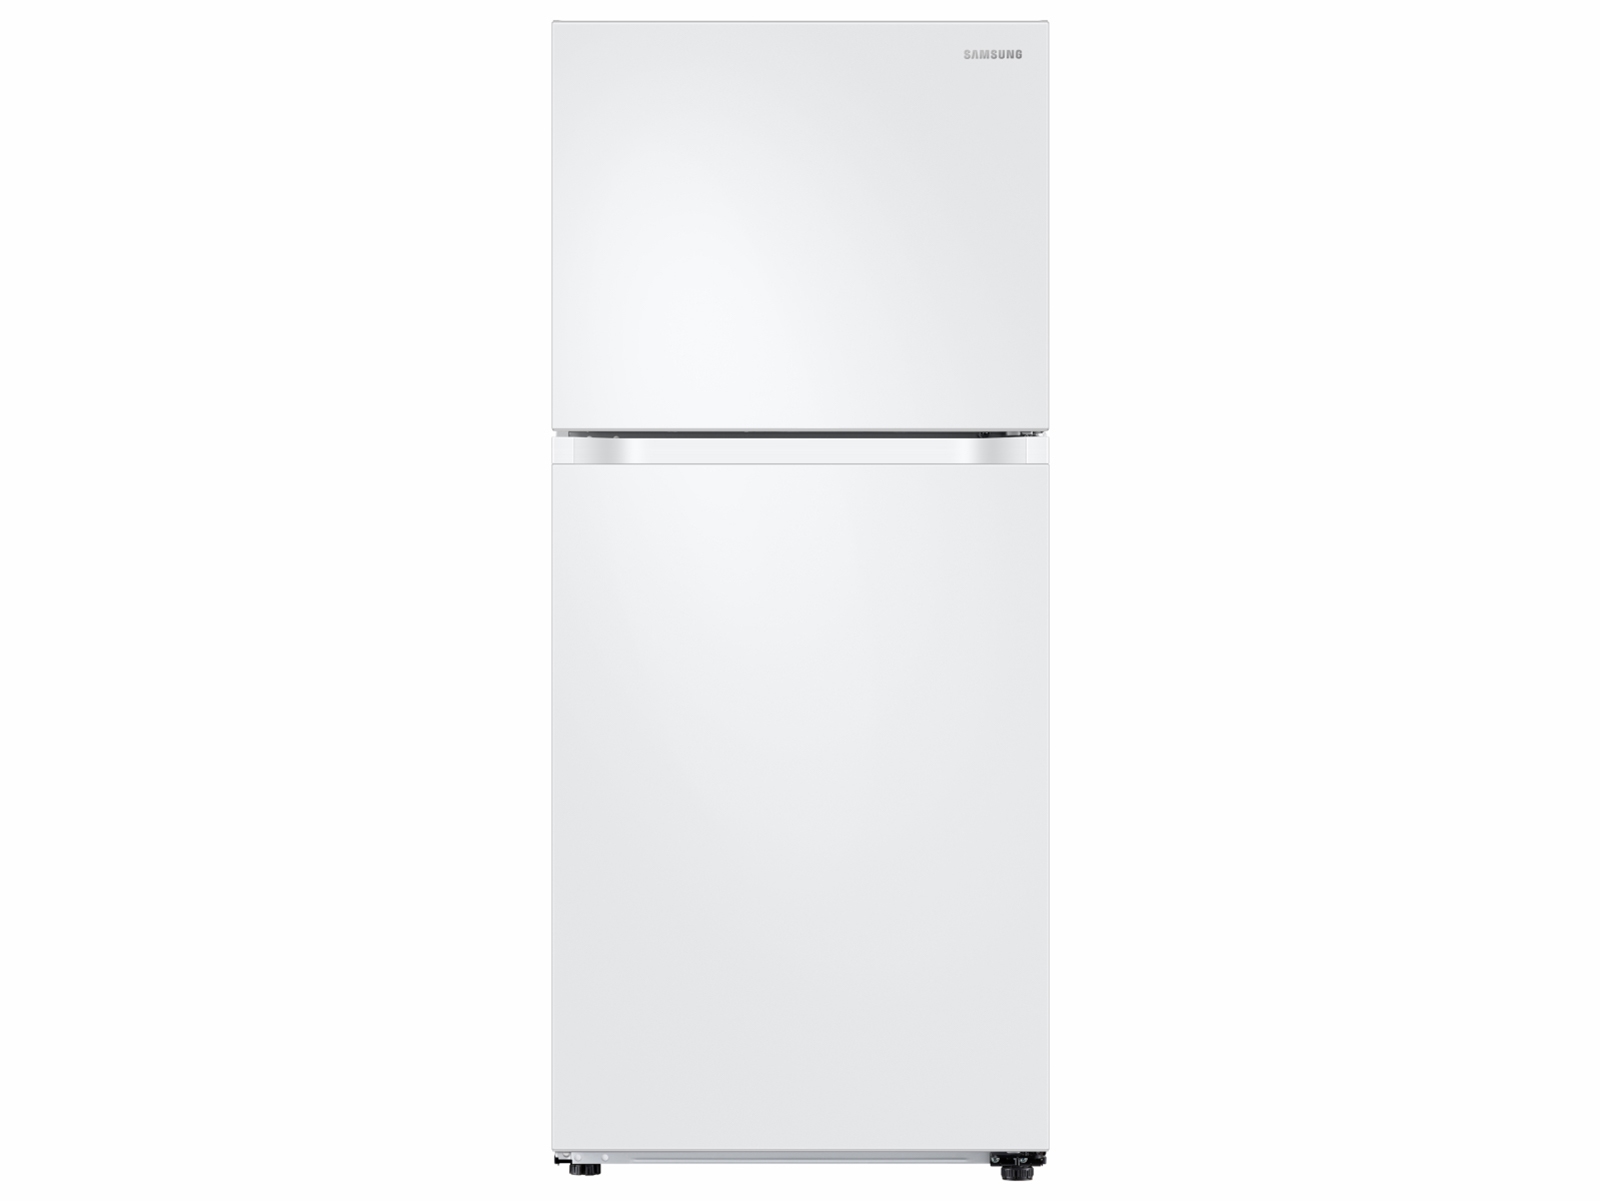 Samsung 18 cu. ft. Top Freezer Refrigerator with FlexZone™ and Ice Maker in White(RT18M6215WW/AA)